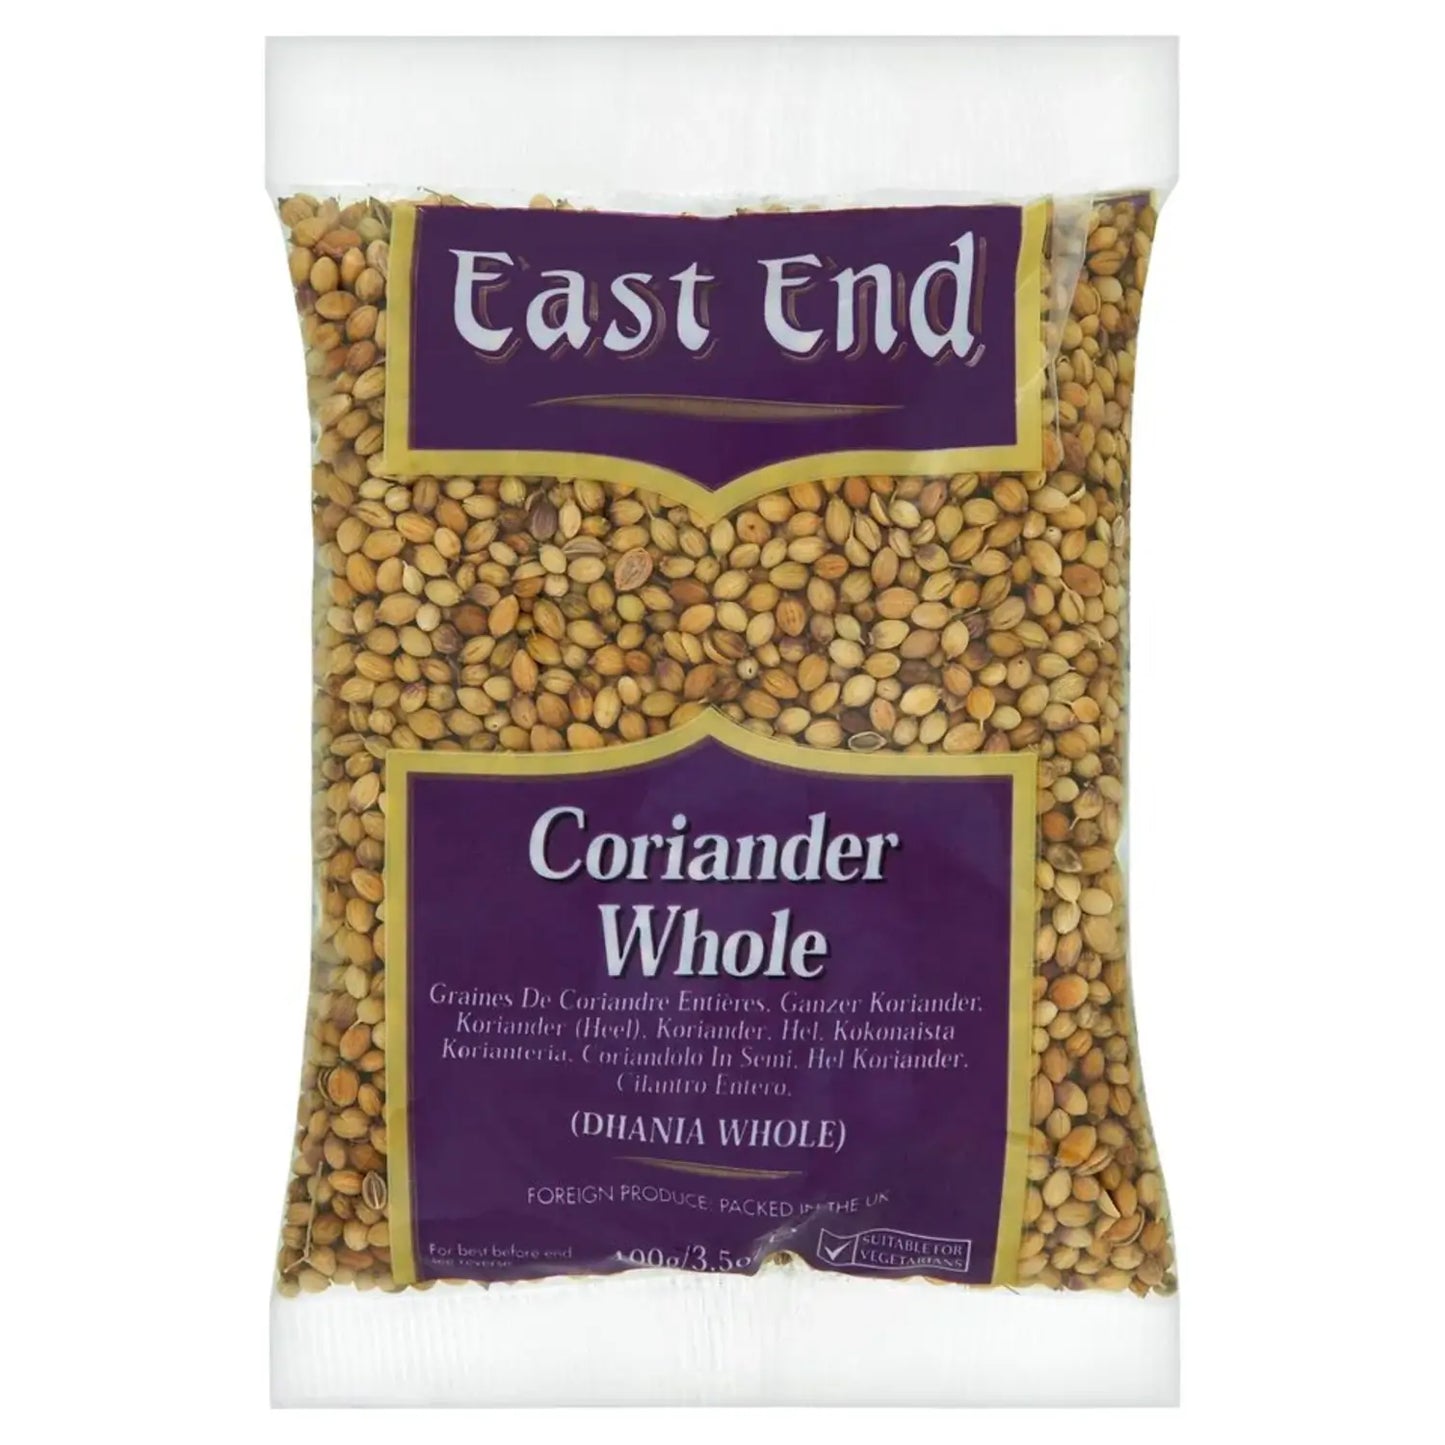 East End Coriander Seeds (Dhania Whole)